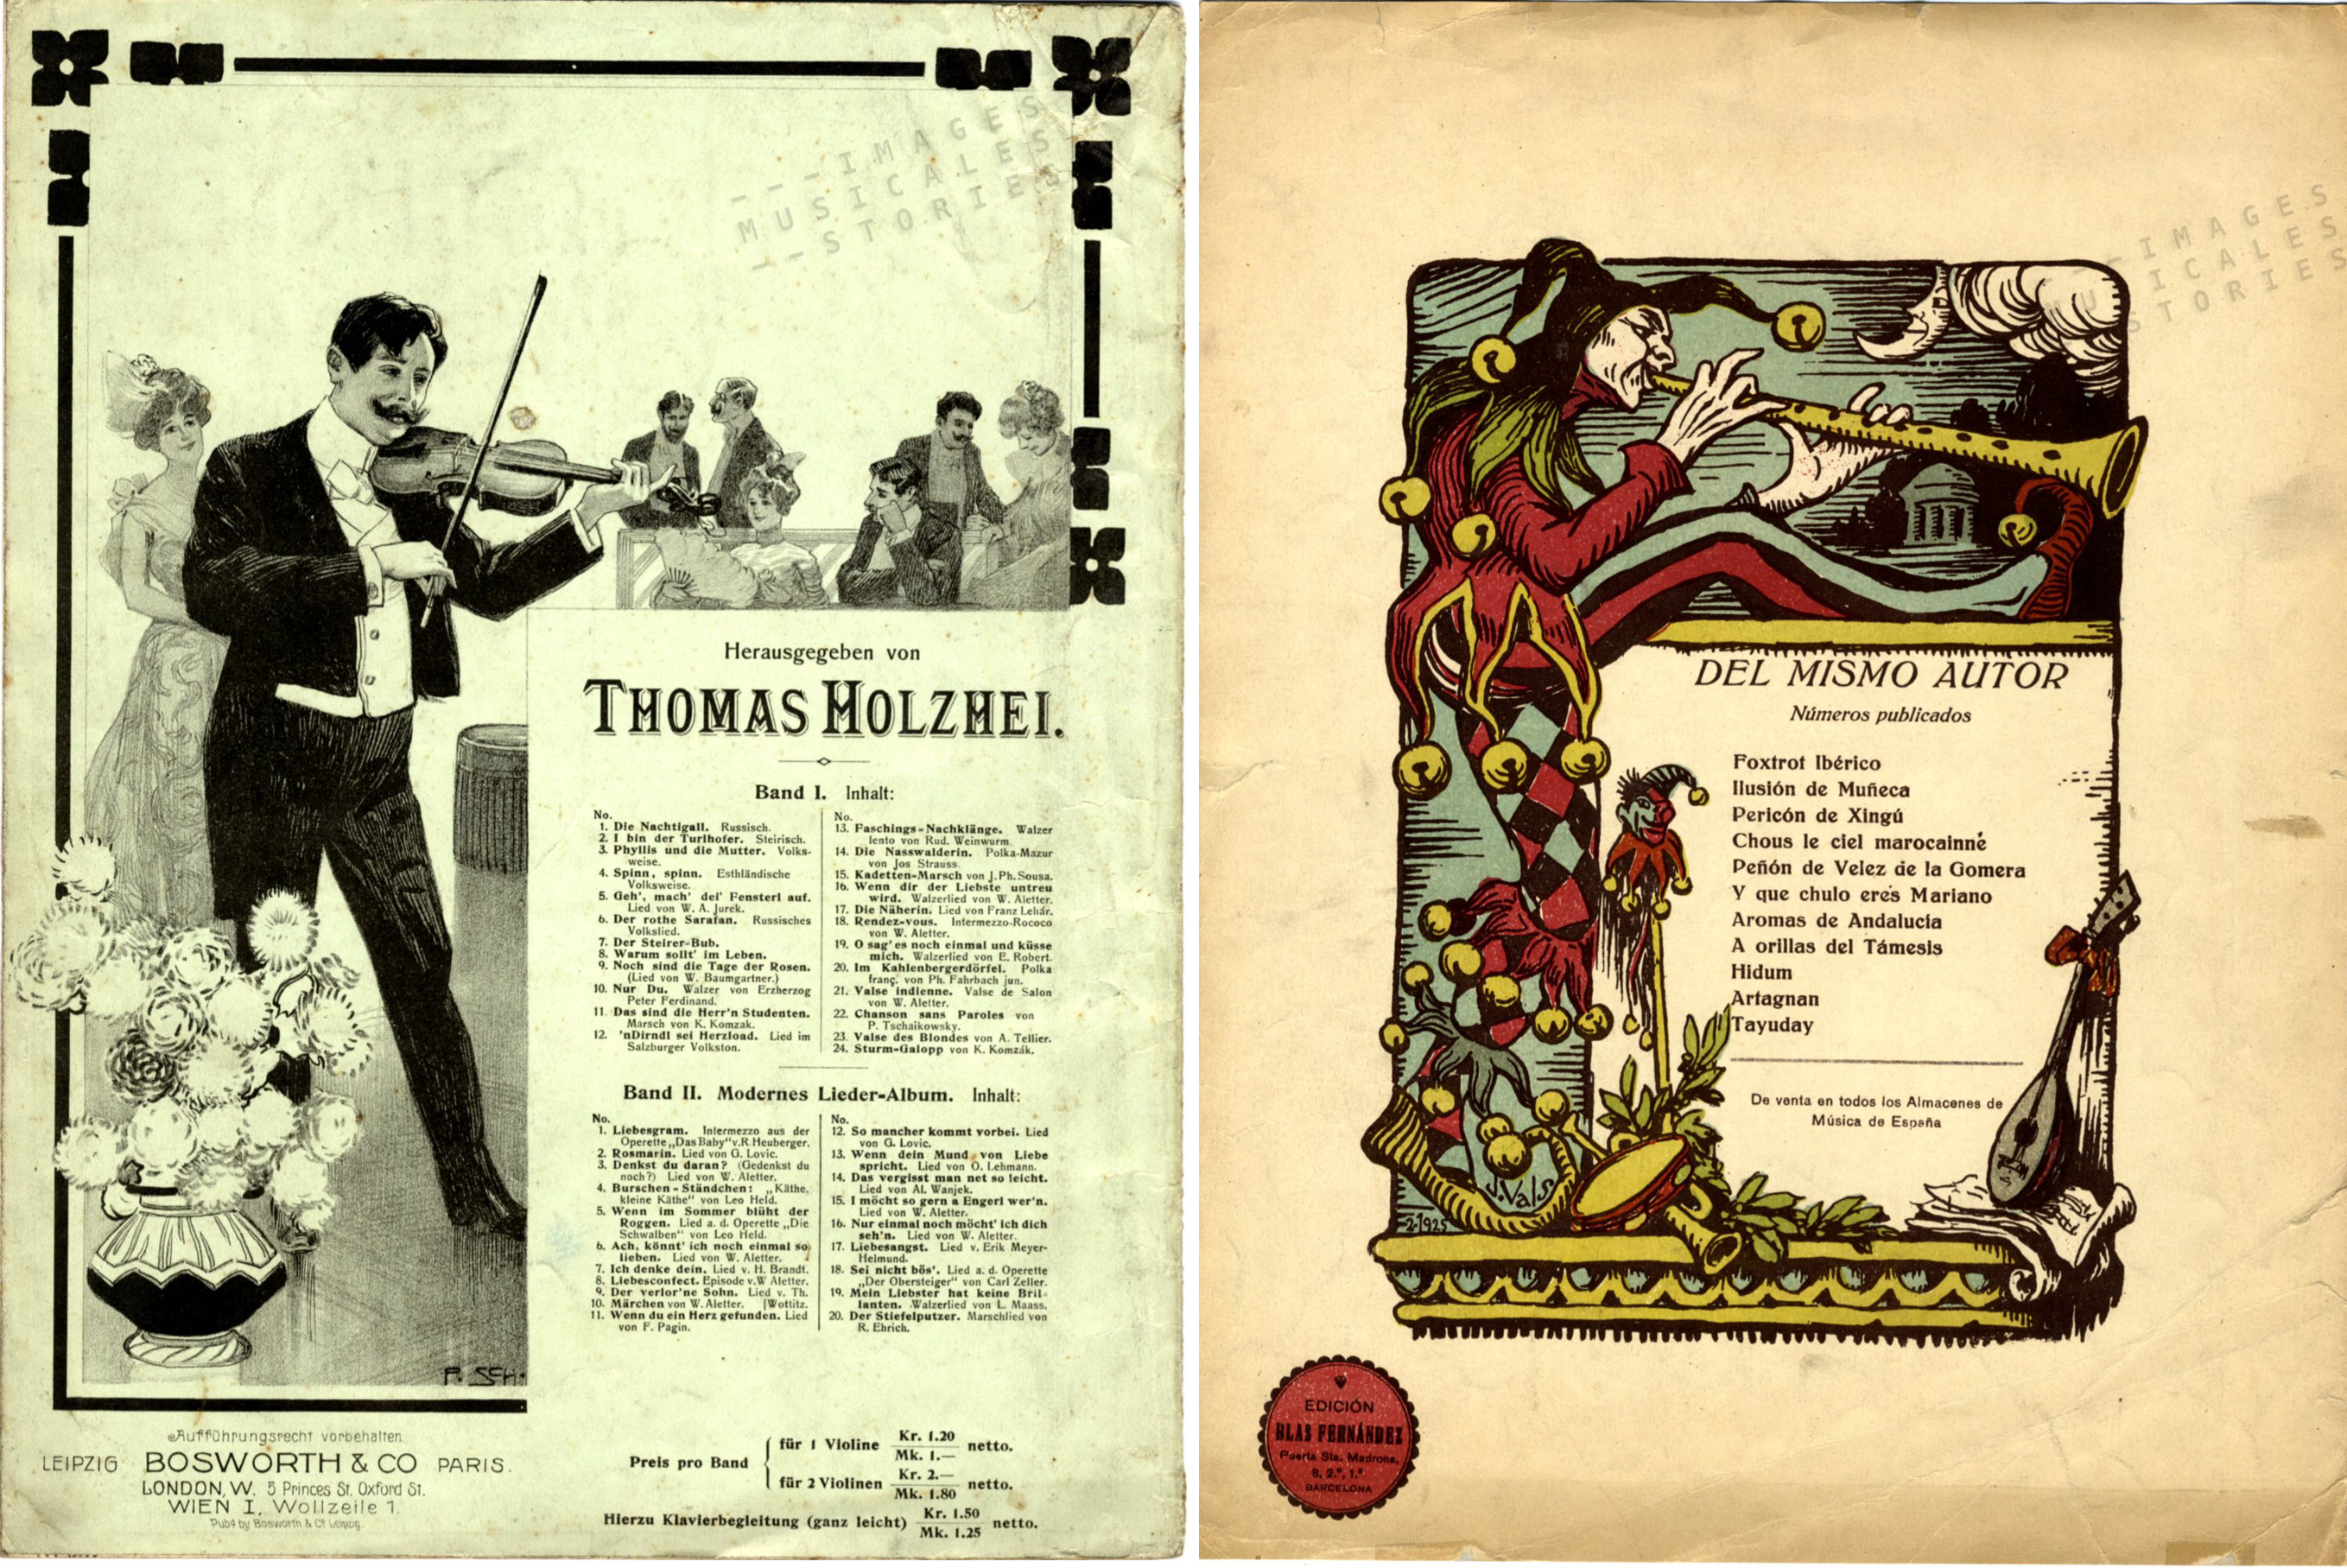 Back covers of sheet music illustrated by P. Schumann and J. Vals